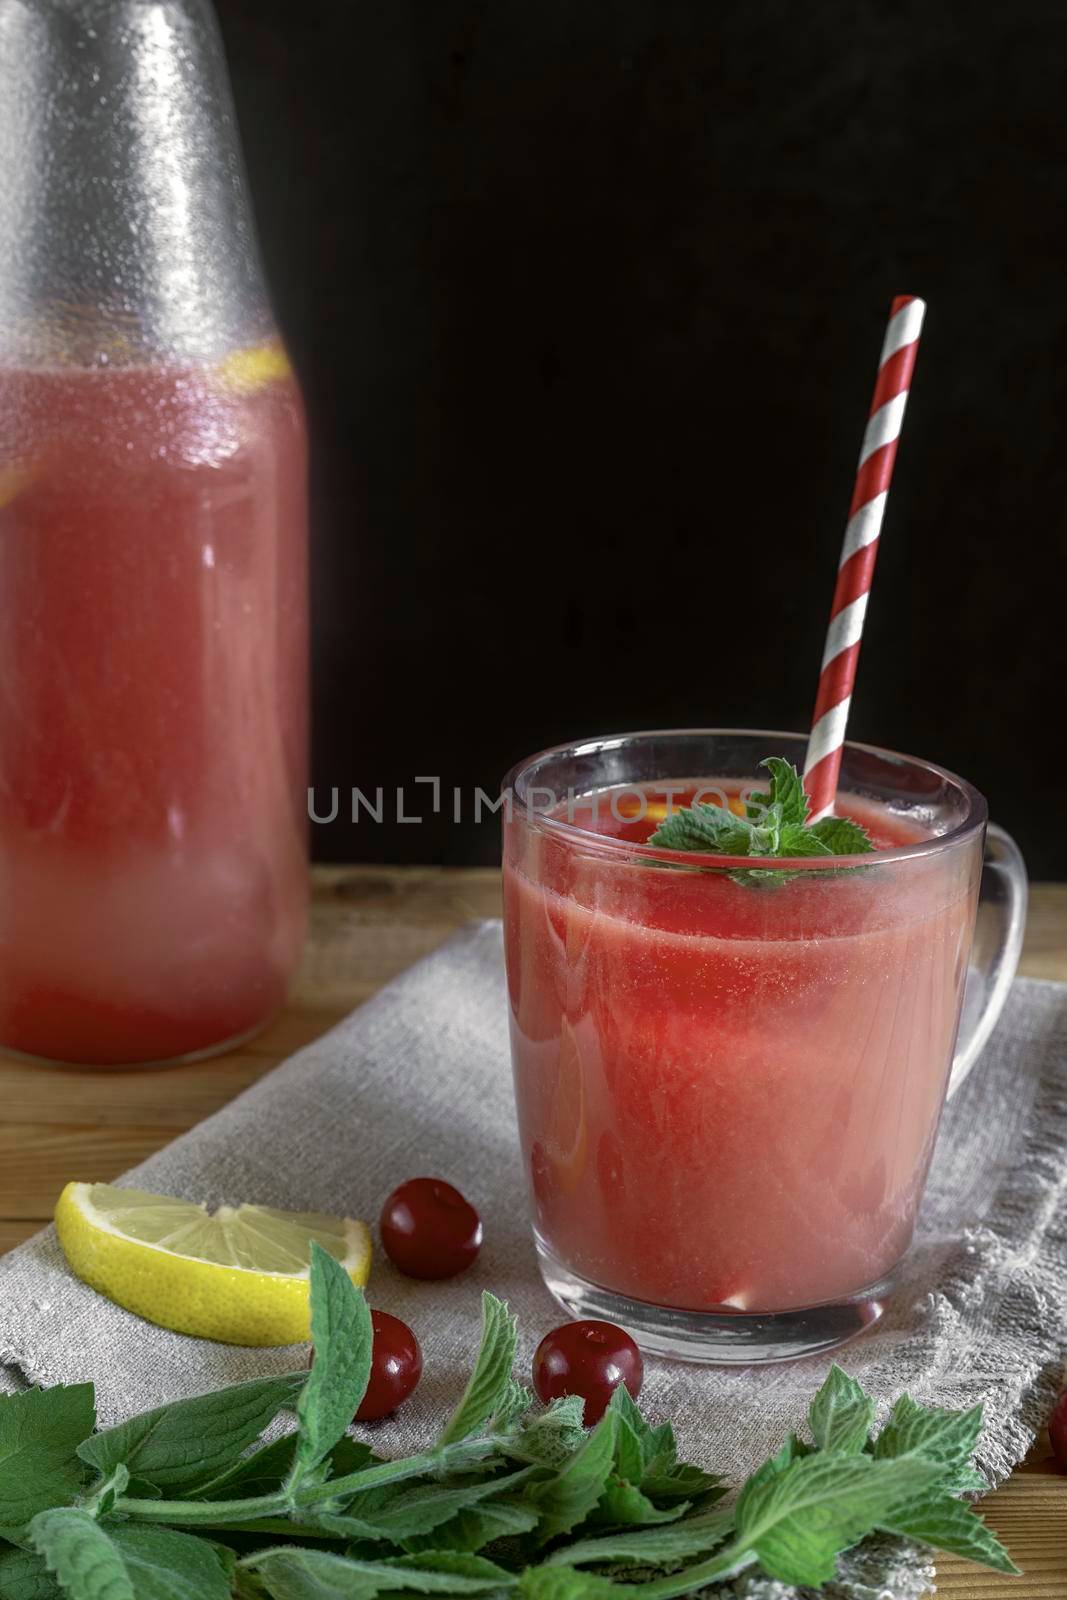 Watermelon juice with lemon and cherry berries by georgina198